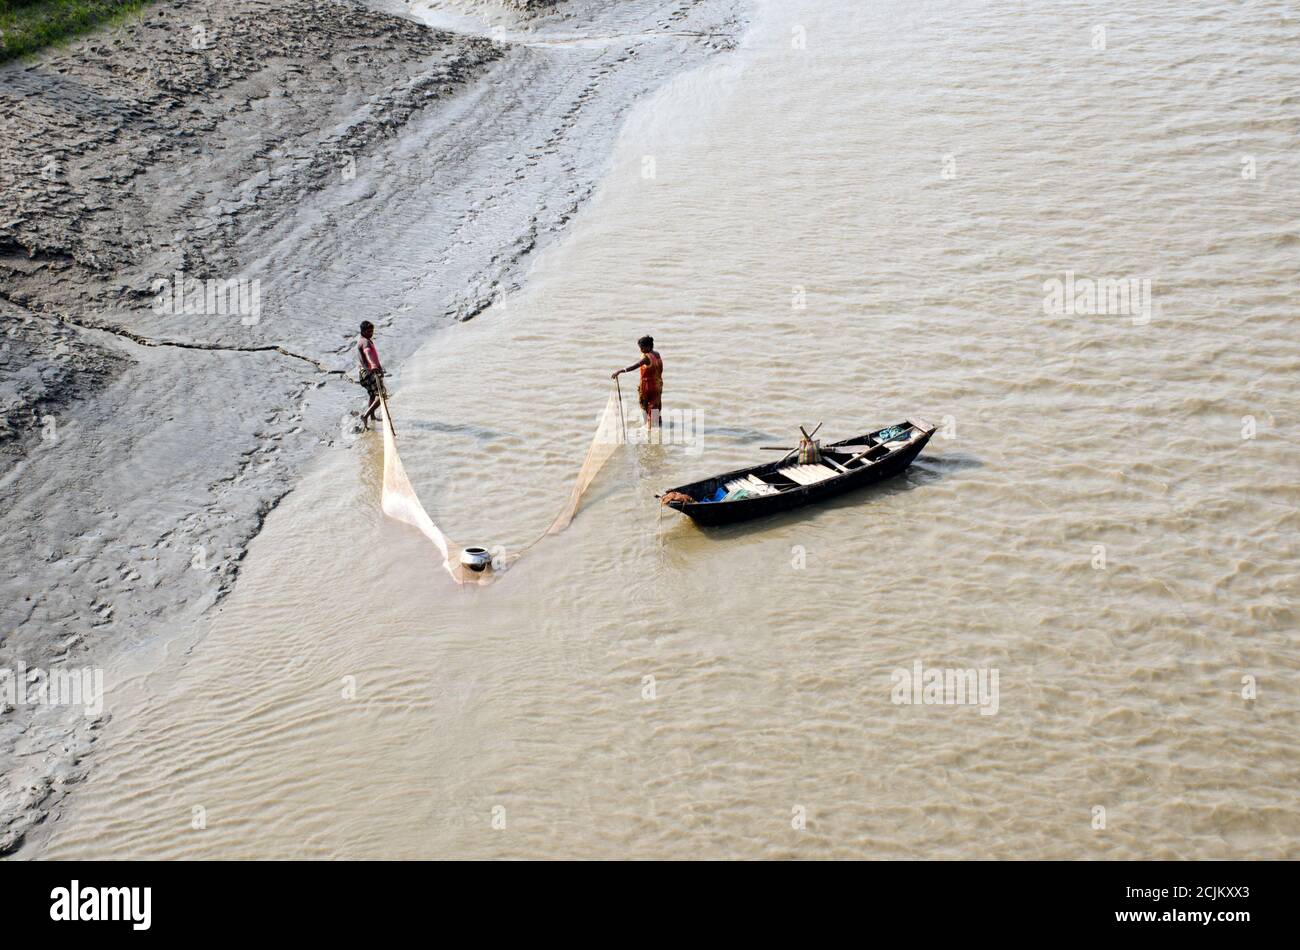 fishing at matla river canning west bengal Stock Photo